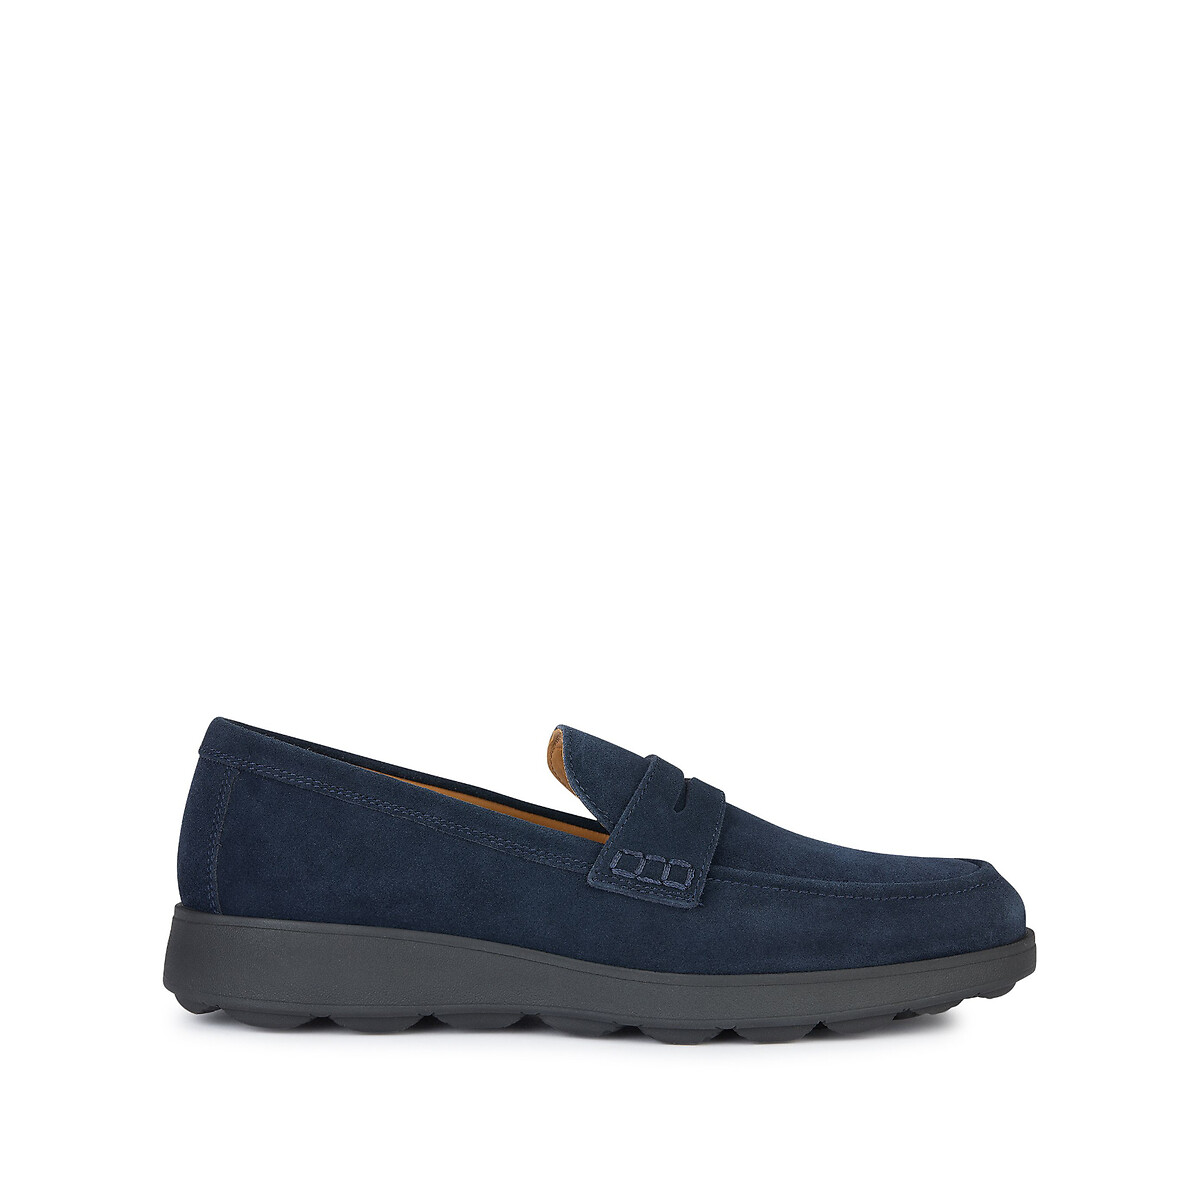 Spherica EC10 Breathable Loafers in Suede